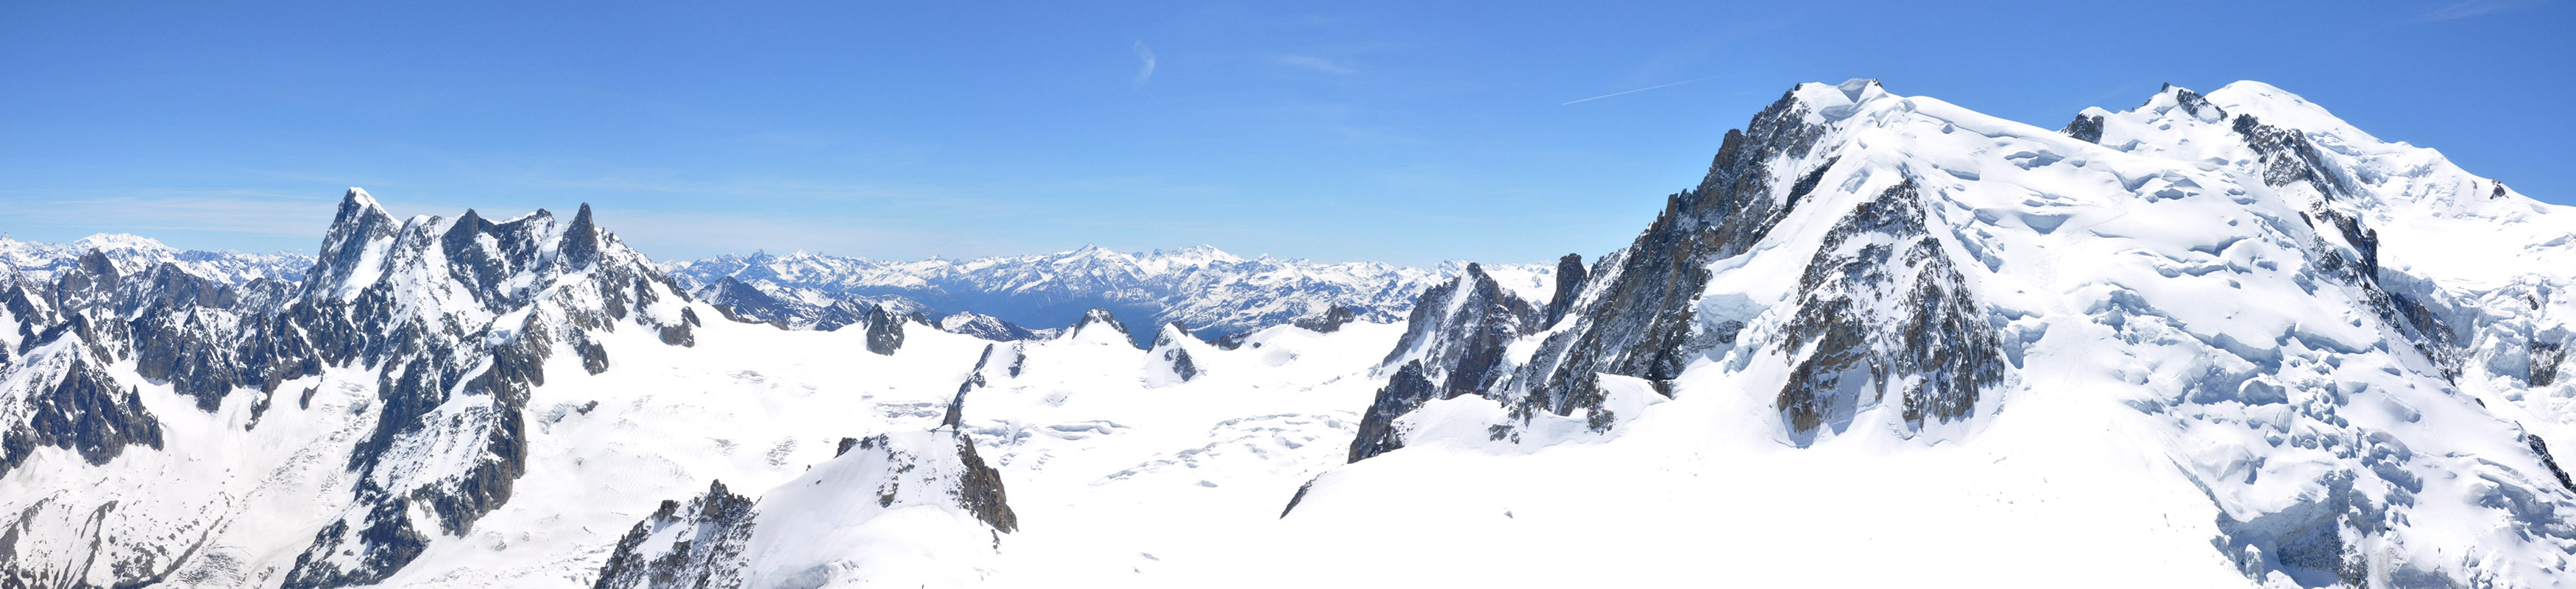 View of the Mont Blanc massive from the Aiguille du Midi